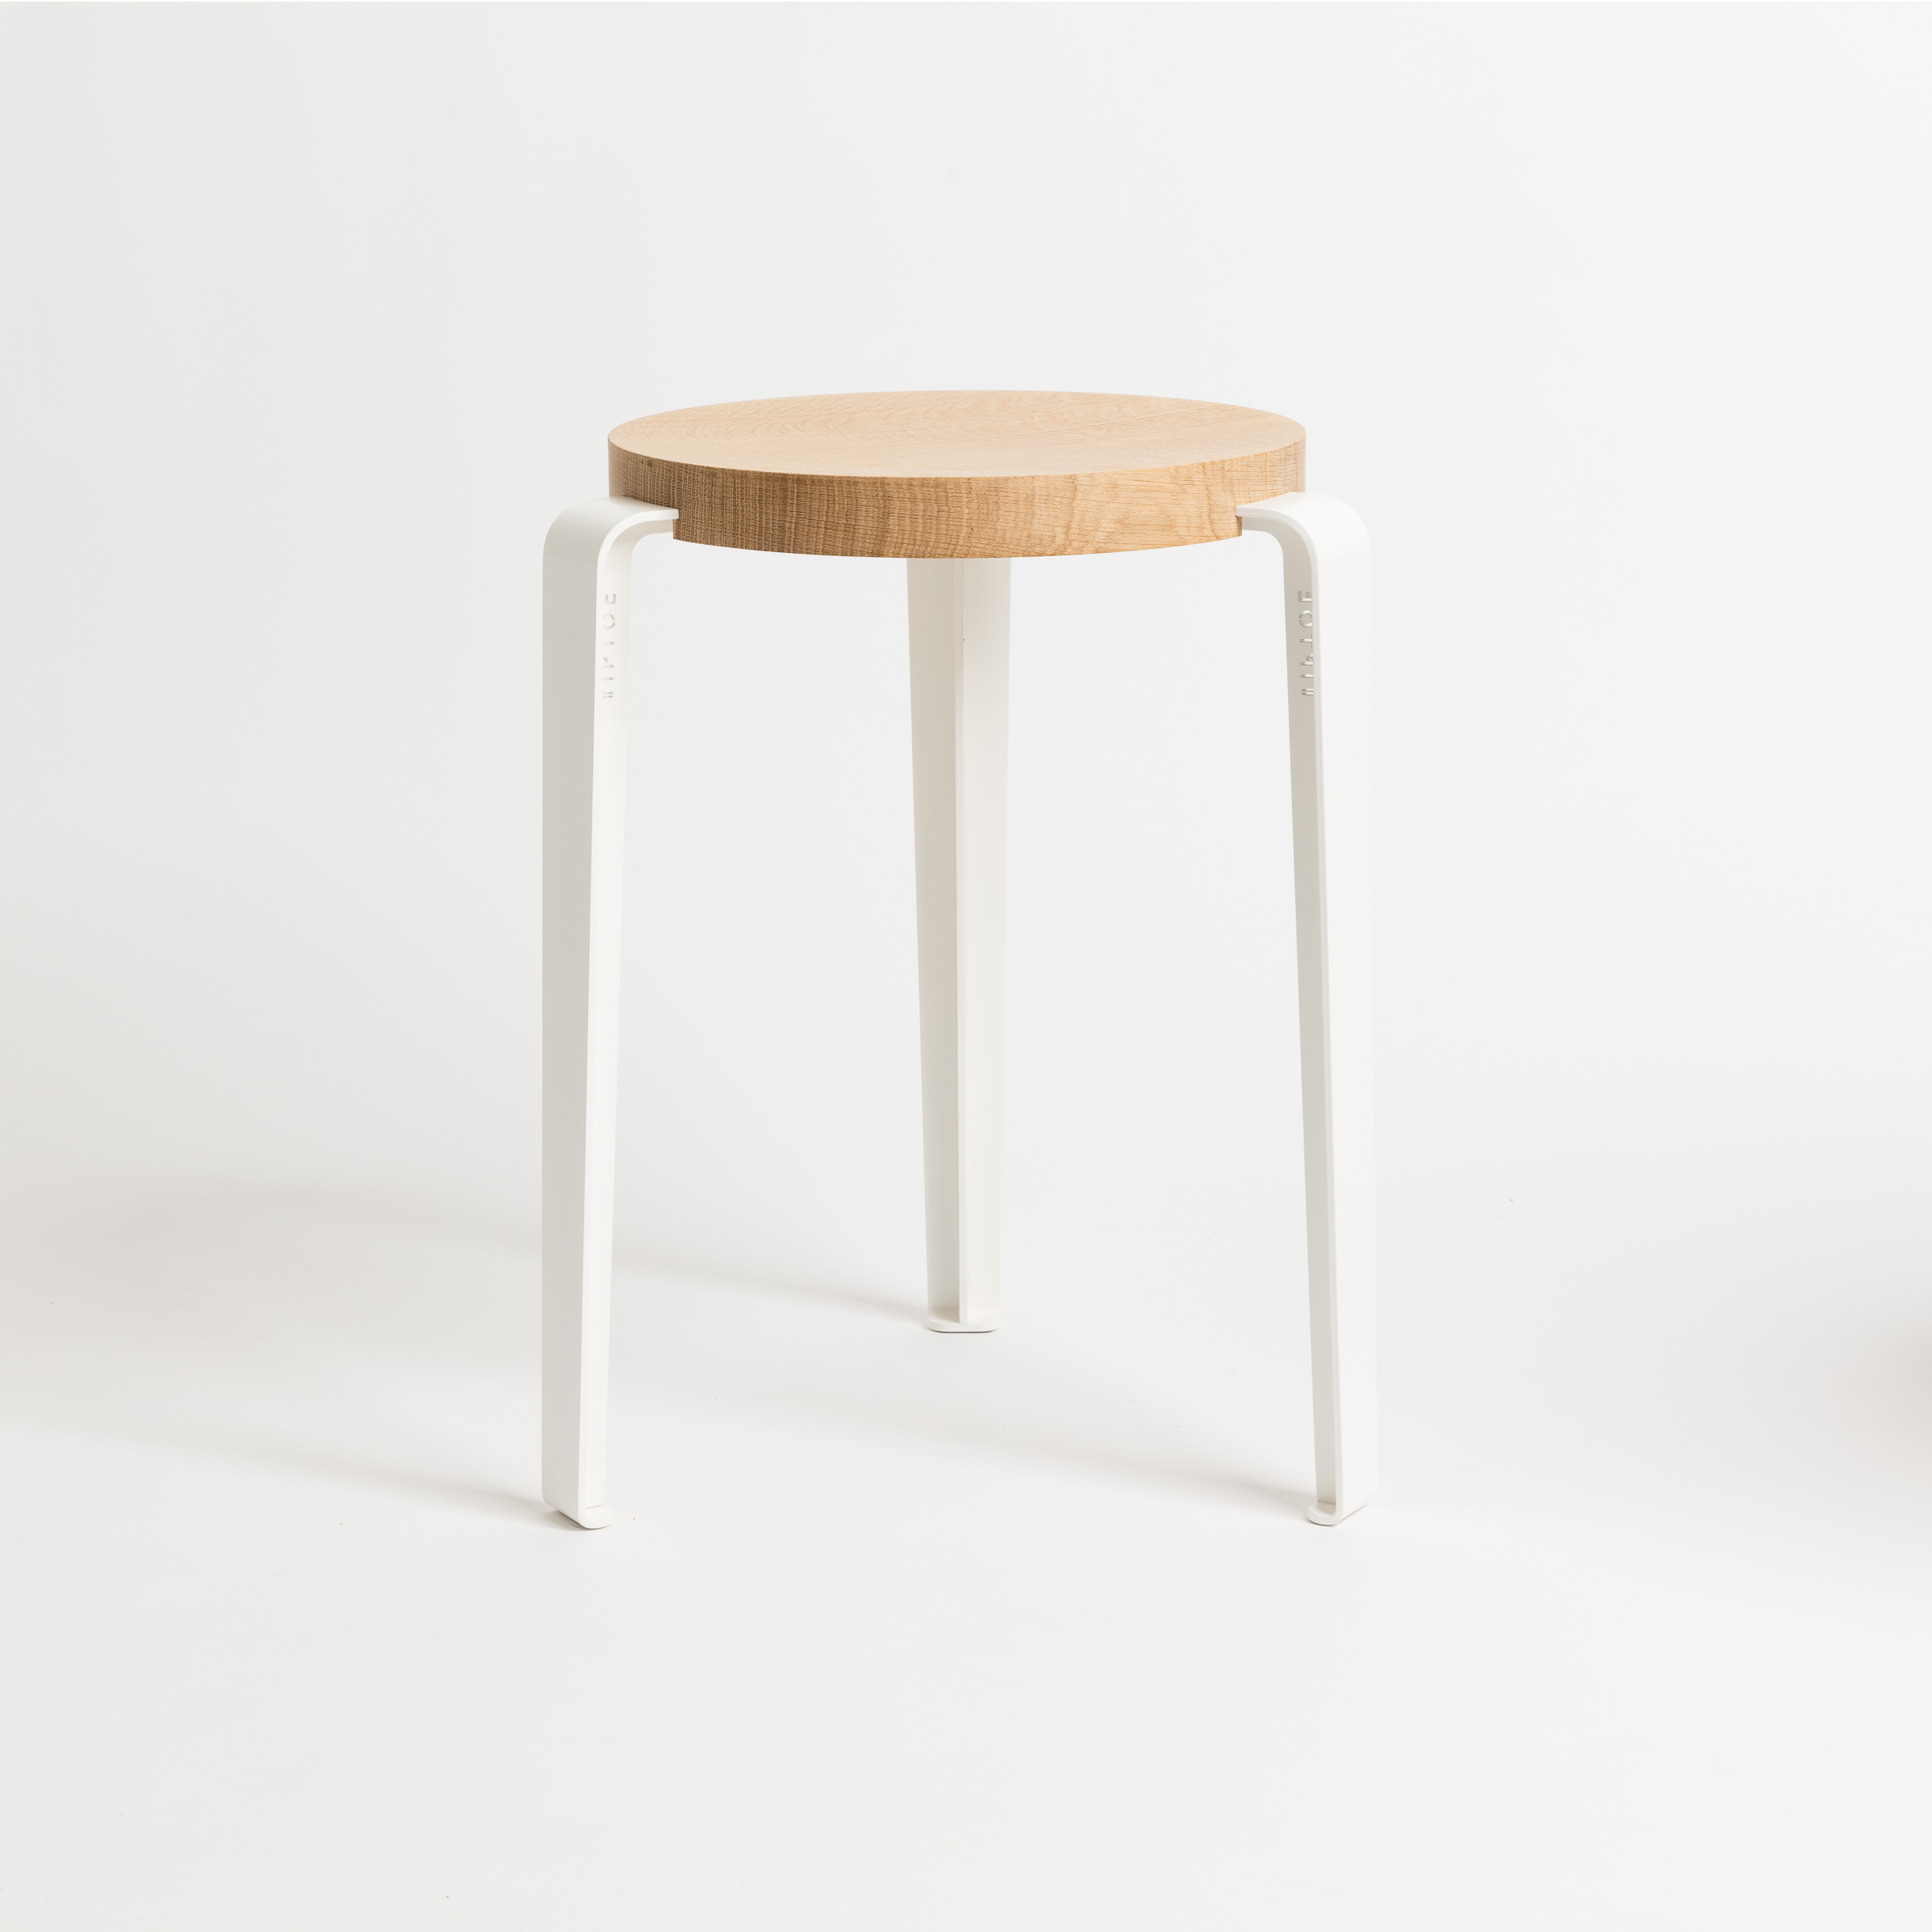 Tiptoe Sustainable Furniture Well Designed Well Made And Built